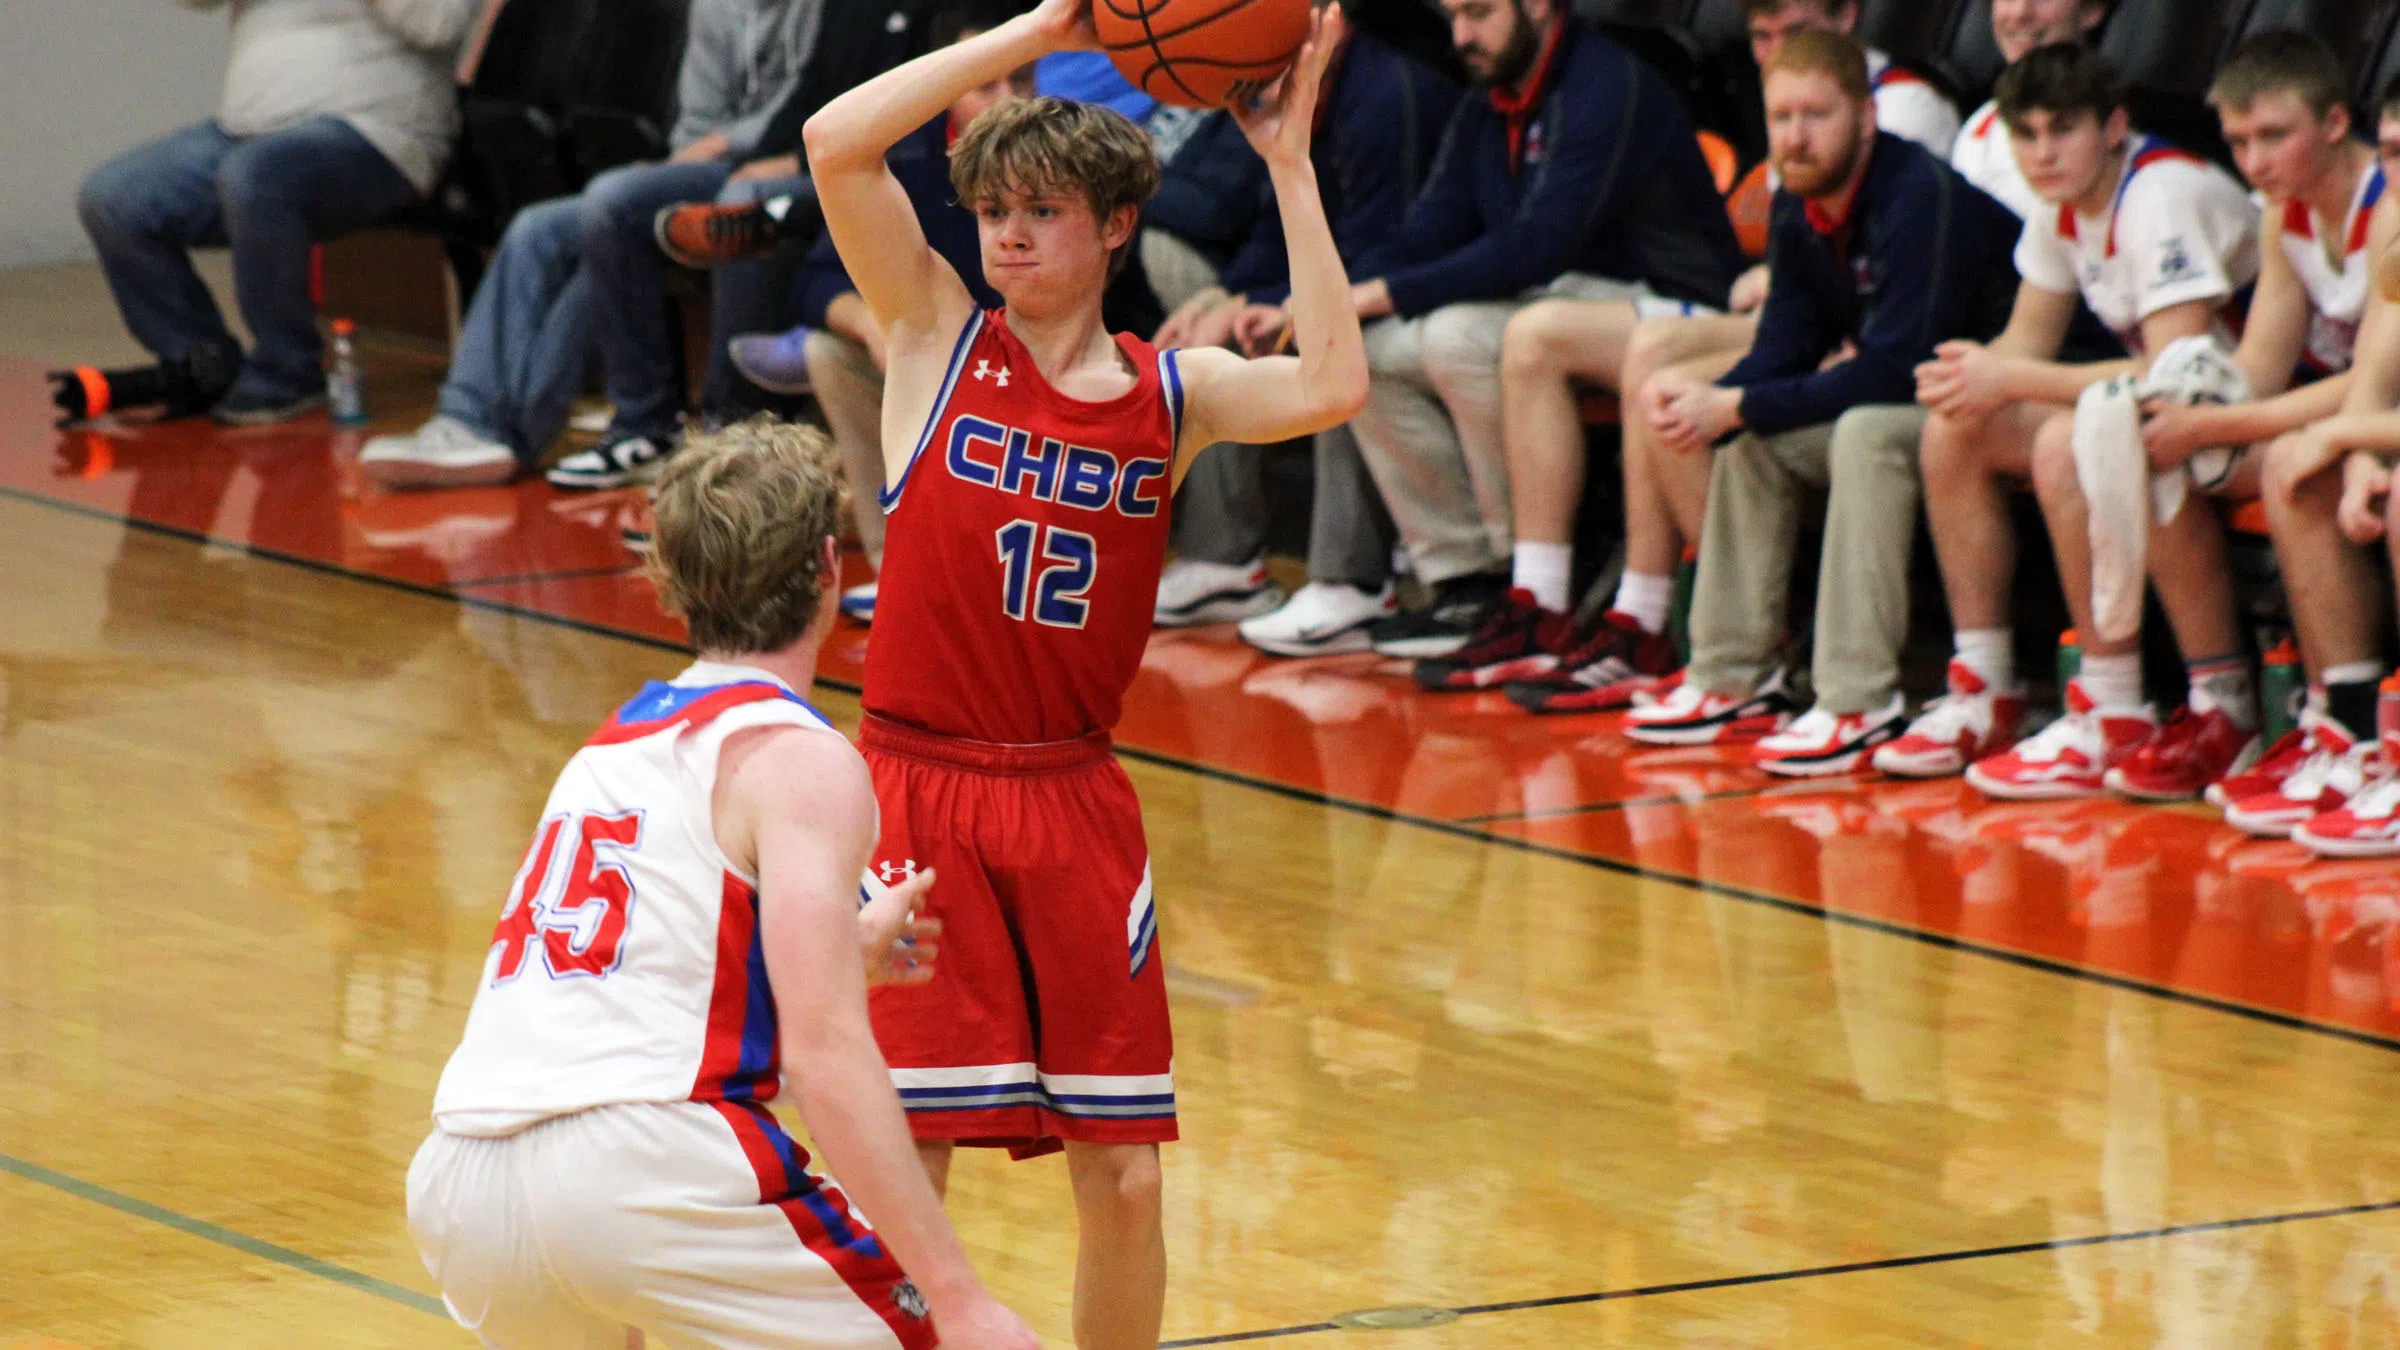 CHBC Falls to North Clay in Consolation Semifinals, Will Play for 7th